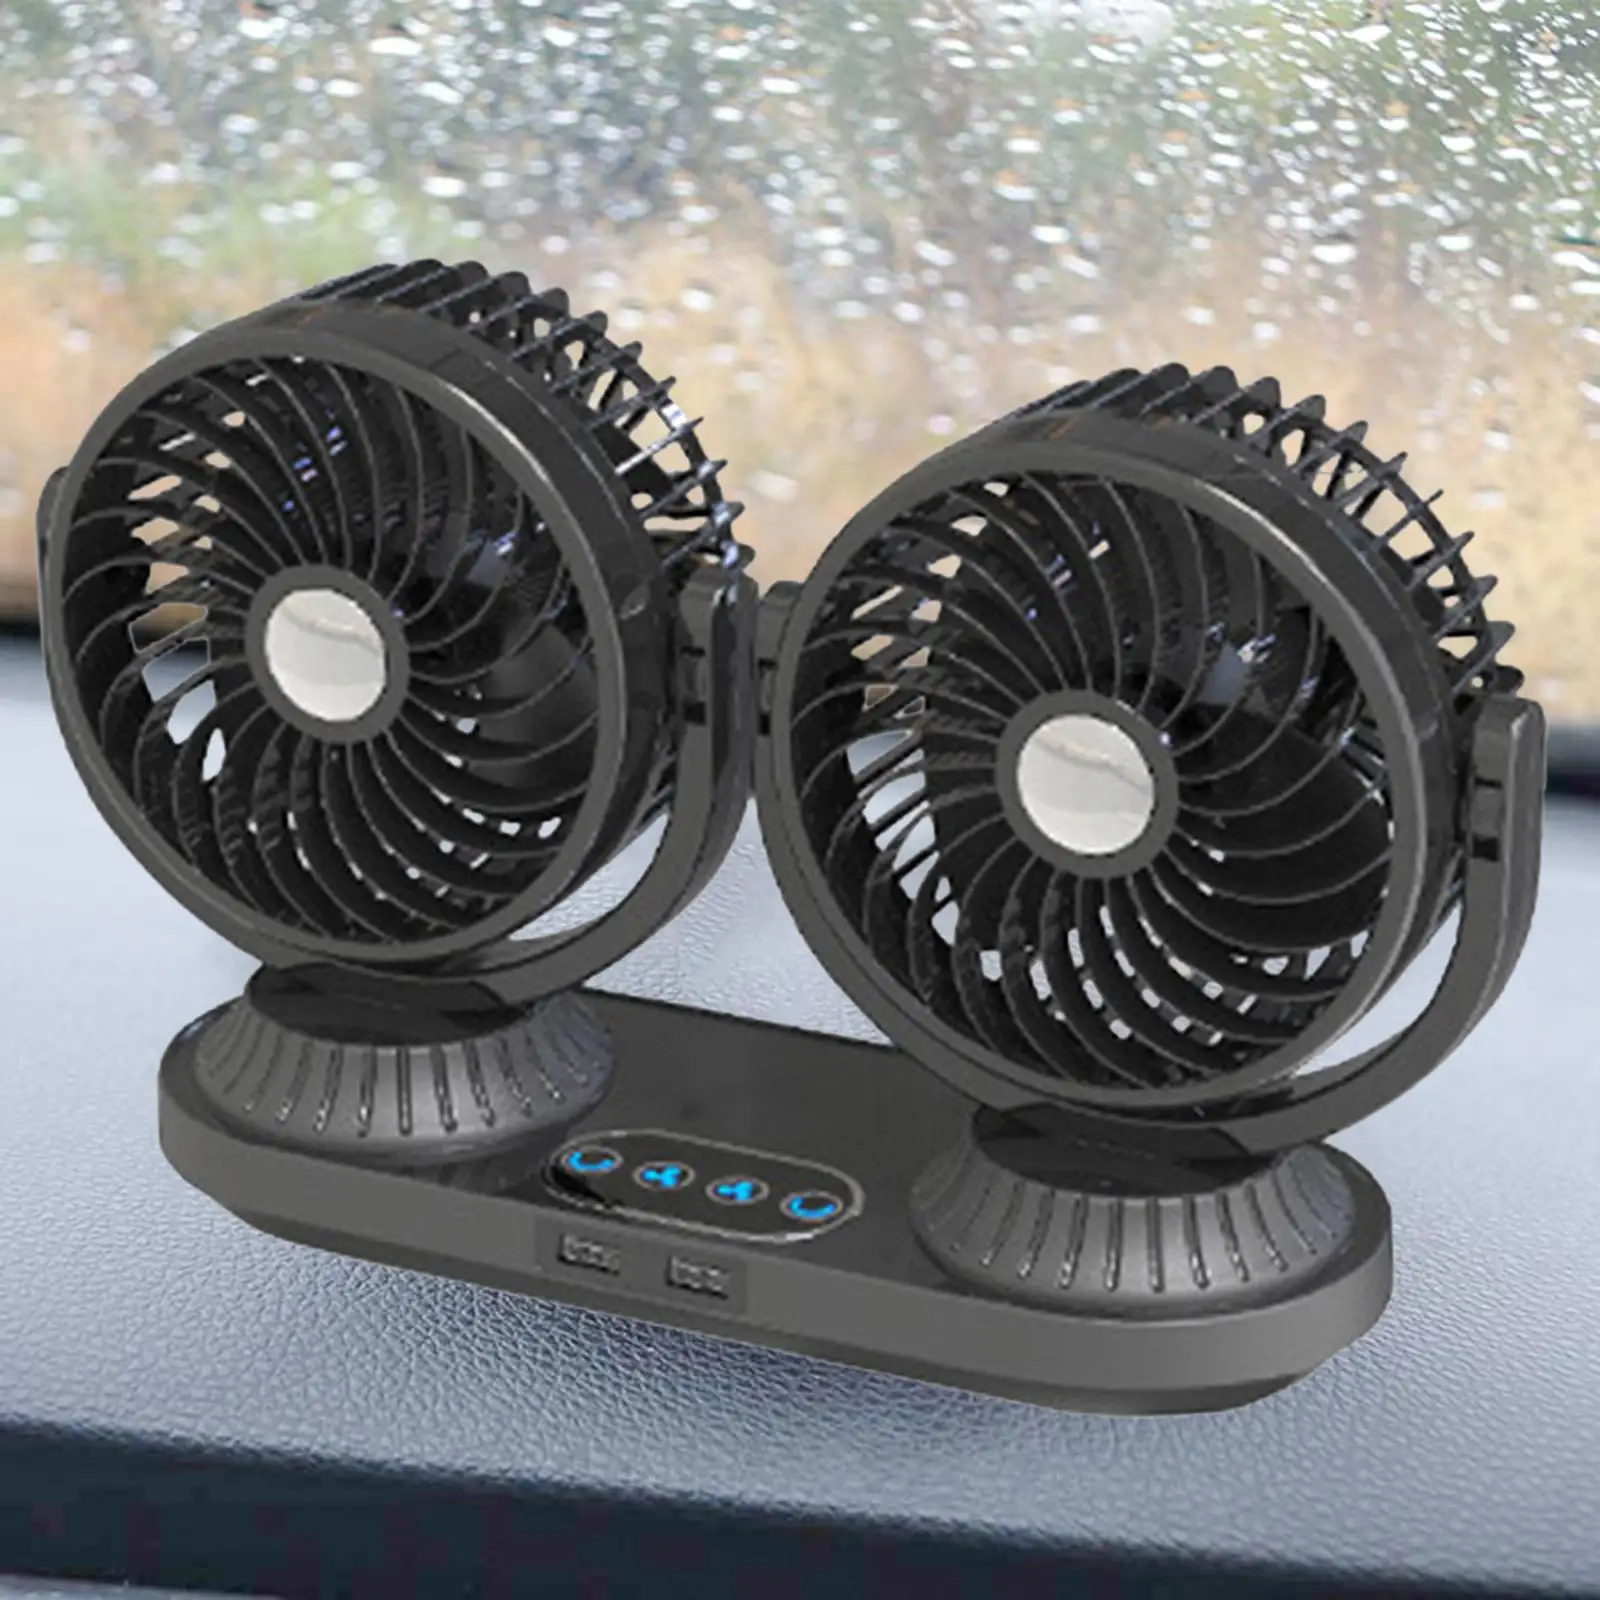 Dual Heads Car Fan for 12V 24V Vehicles 3 Speeds Adjustable 360 Degree Rotating Portable Dashboard Air Cooler Auto Cooling Fan